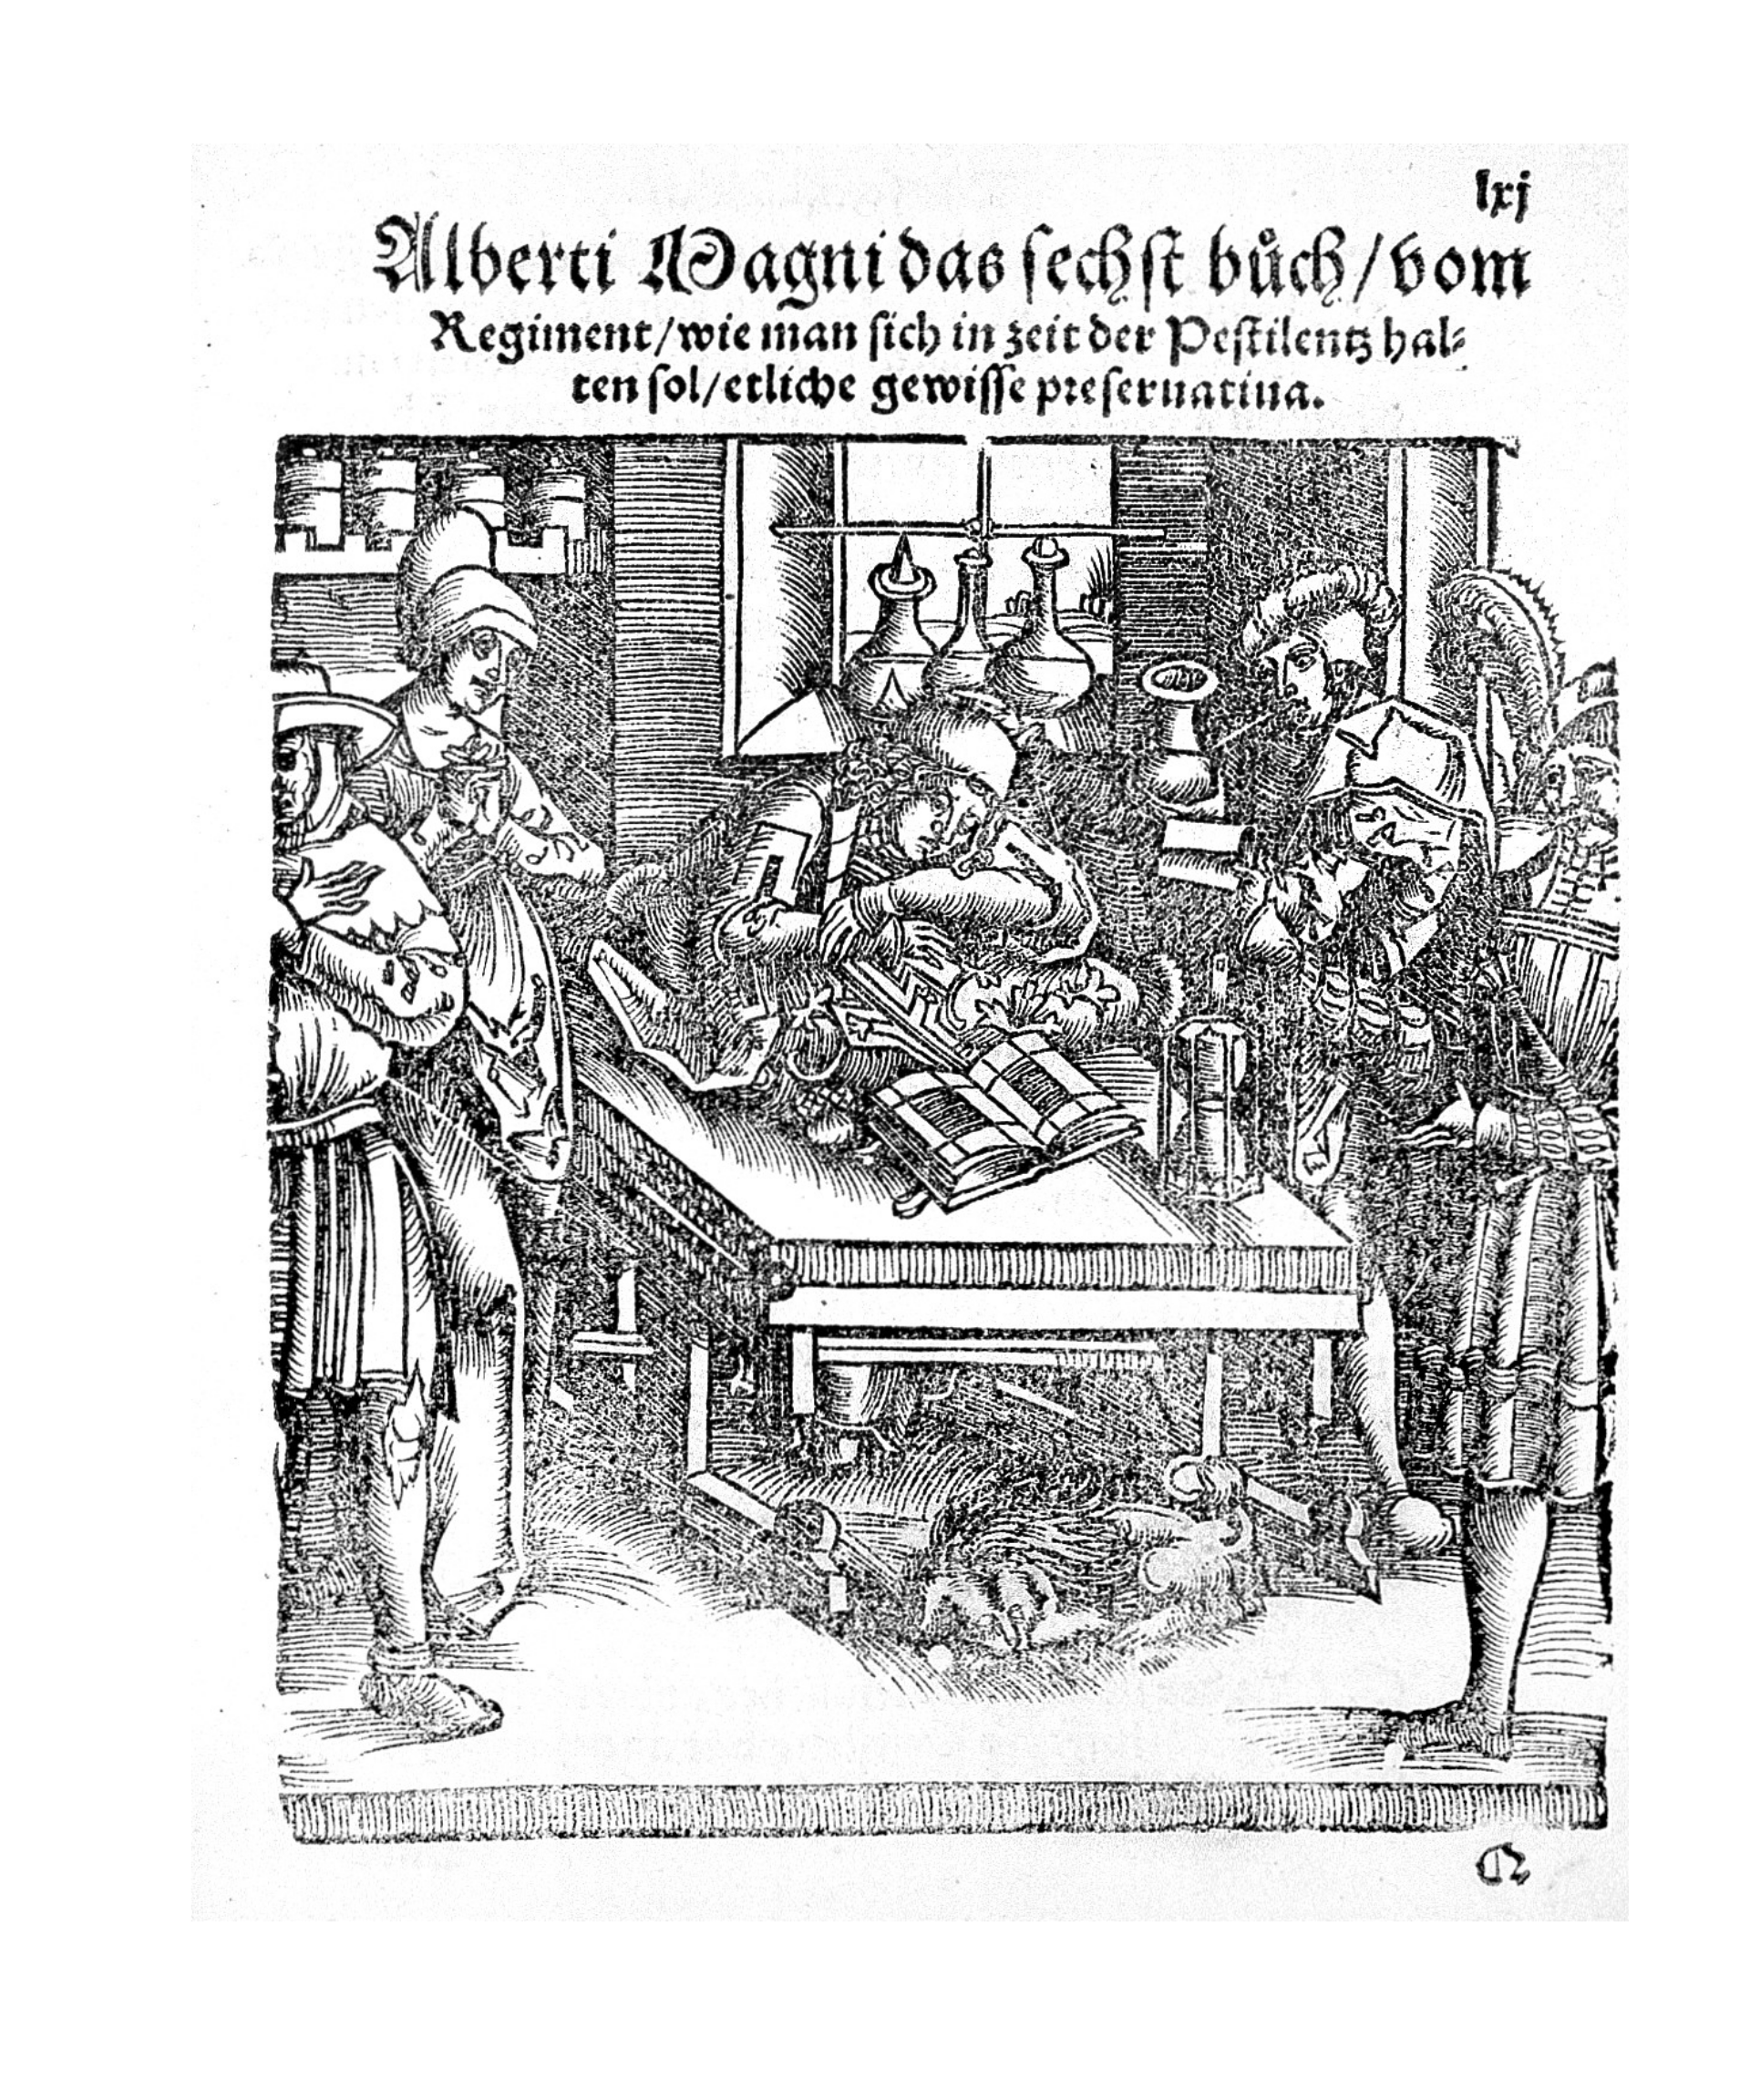 Credit: Wellcome Library, London. Wellcome Images images@wellcome.ac.uk http://wellcomeimages.org Plague treatise - a full page woodcut representing a man at a table studying a book, he is surrounded by four persons, - one holding a urine glass, Woodcut Darin durch sechs kurtzer Buchlin vil Heimlichkeiten der Natur beschriben werden Albertus Magnus Published: 1551 